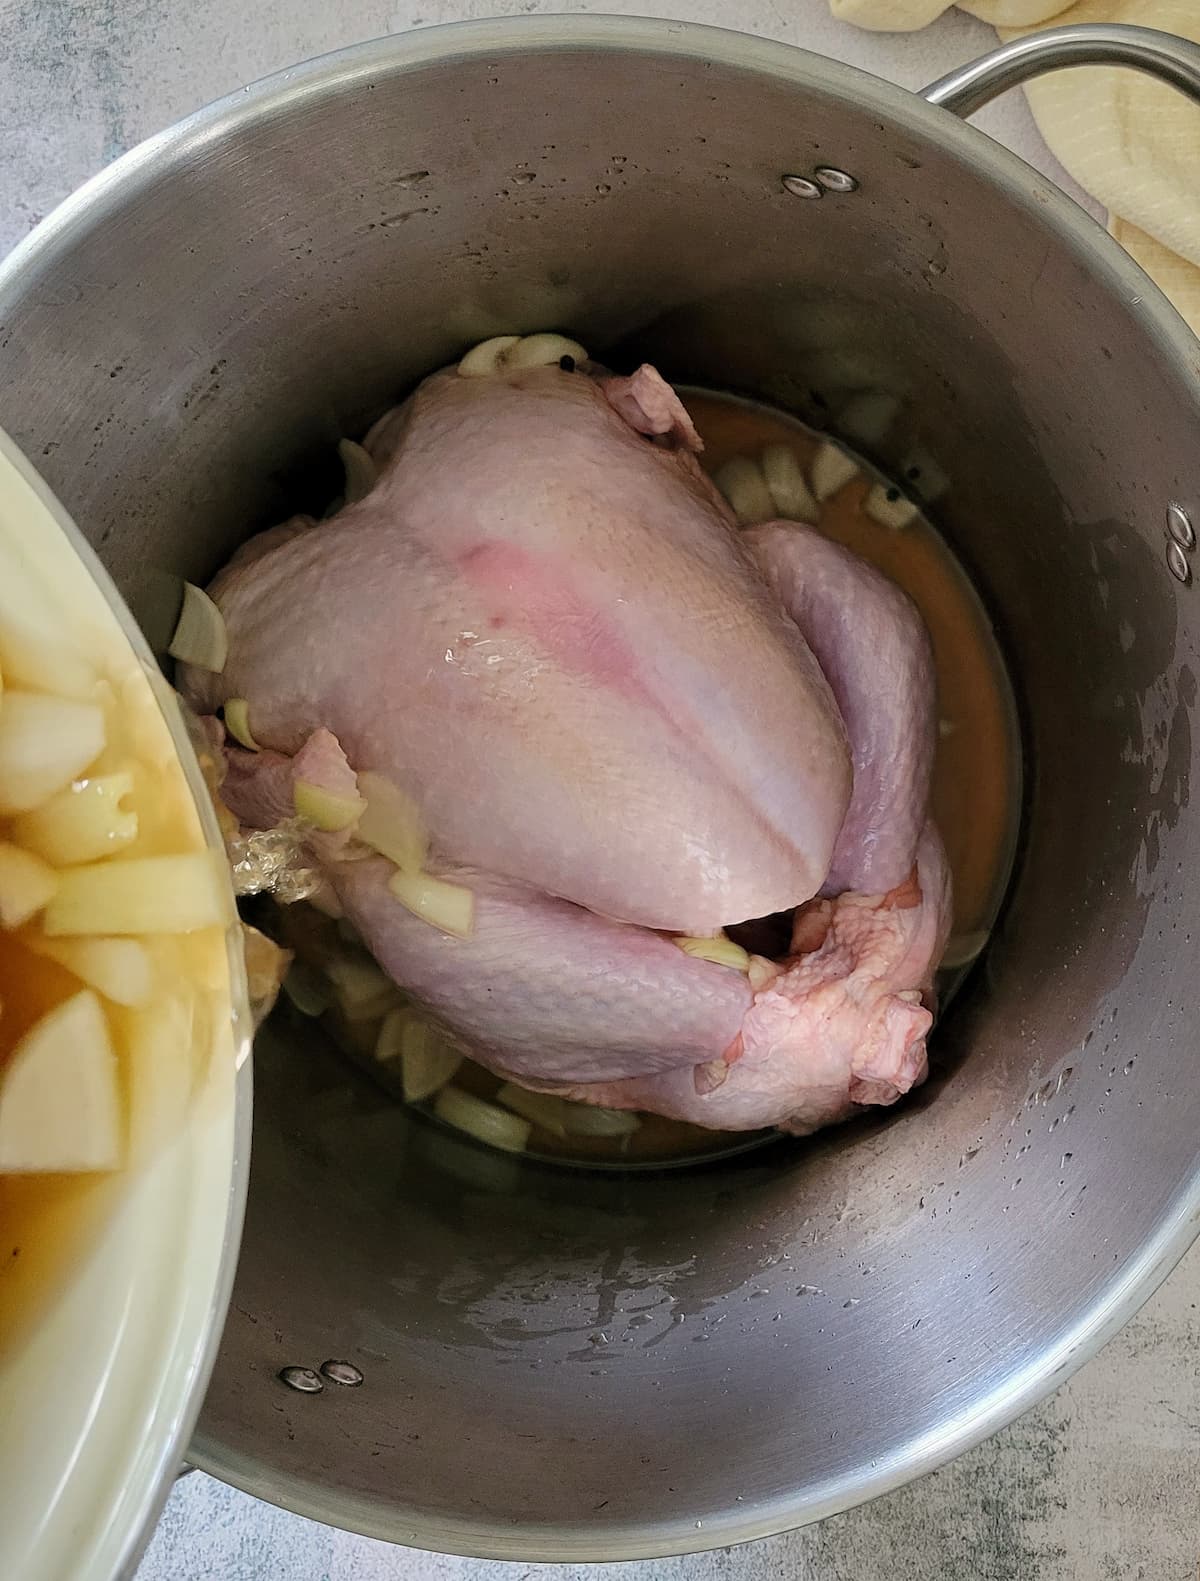 brine with chopped onions being poured on top of a raw turkey in a large pot